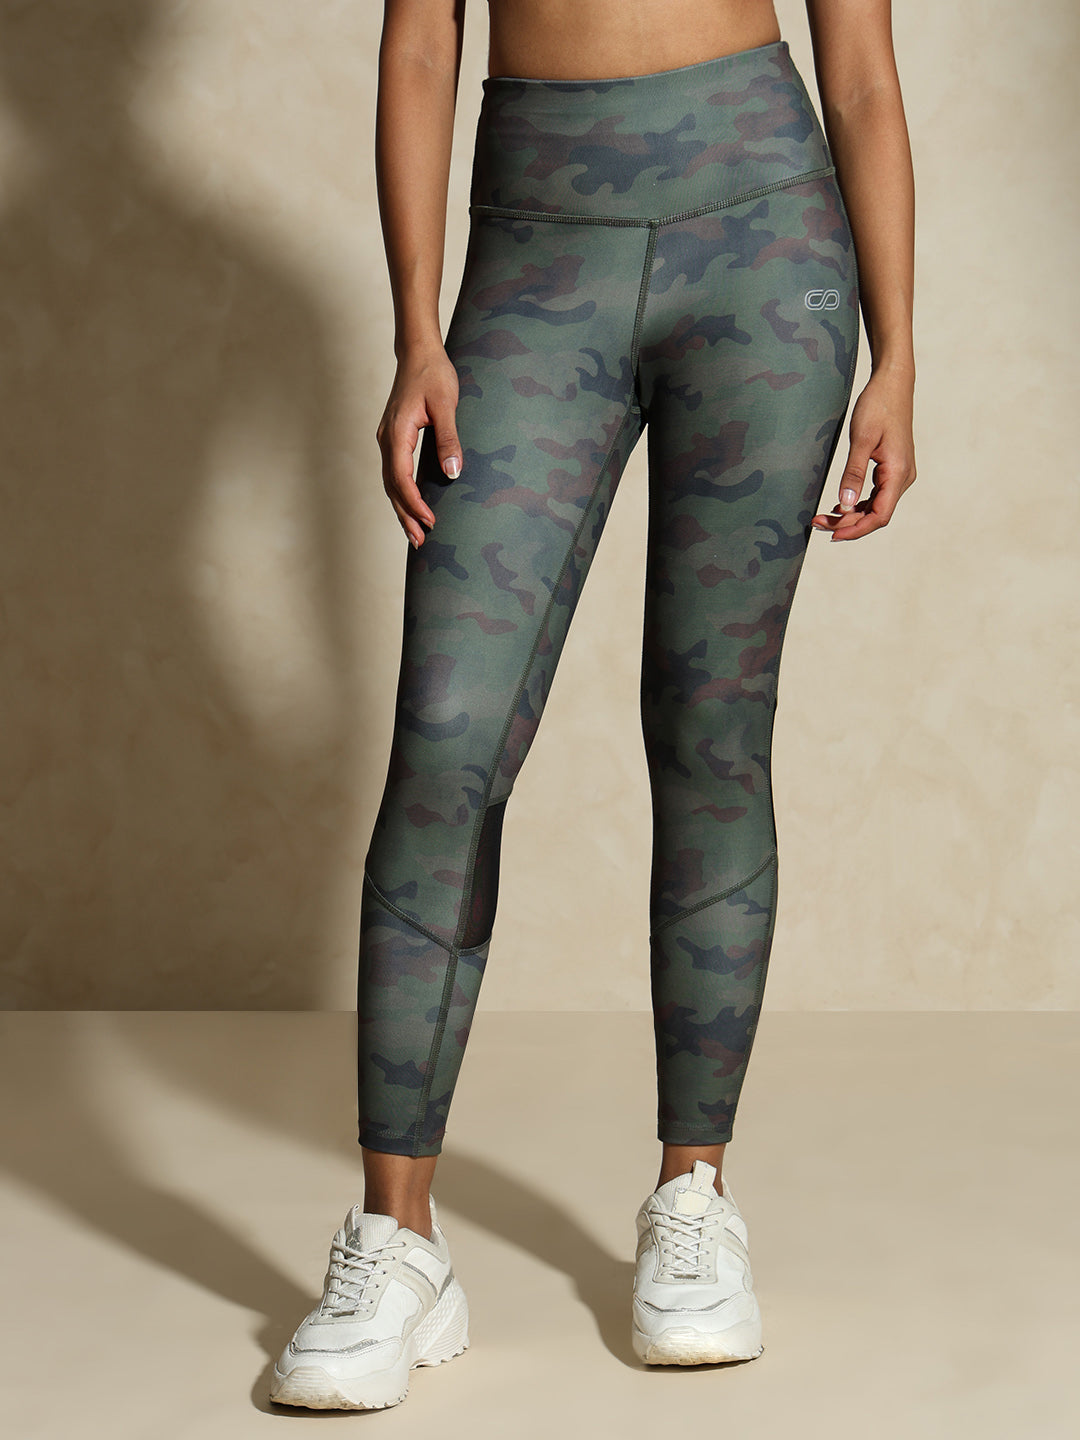 Turquoise Camouflage Leggings with Pockets